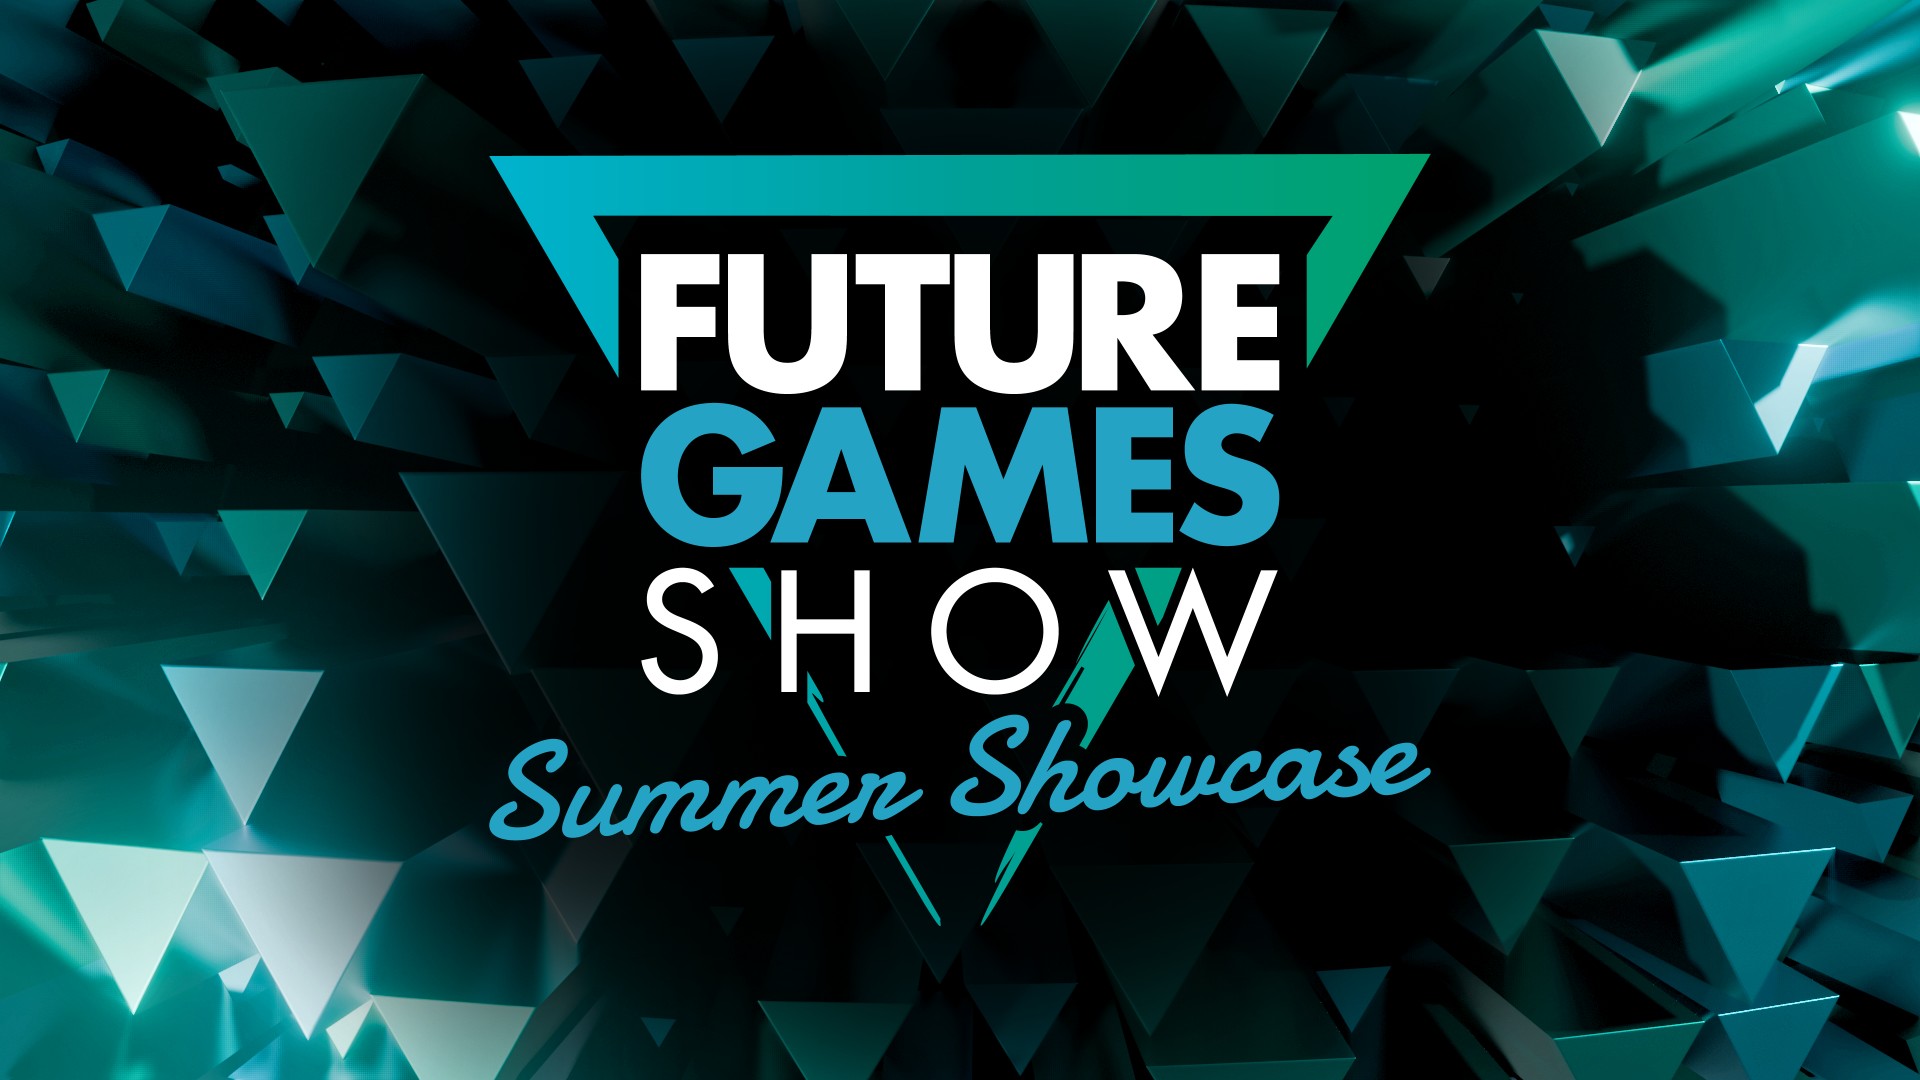 The logo for the Future Games Showcase appears on a blue background.